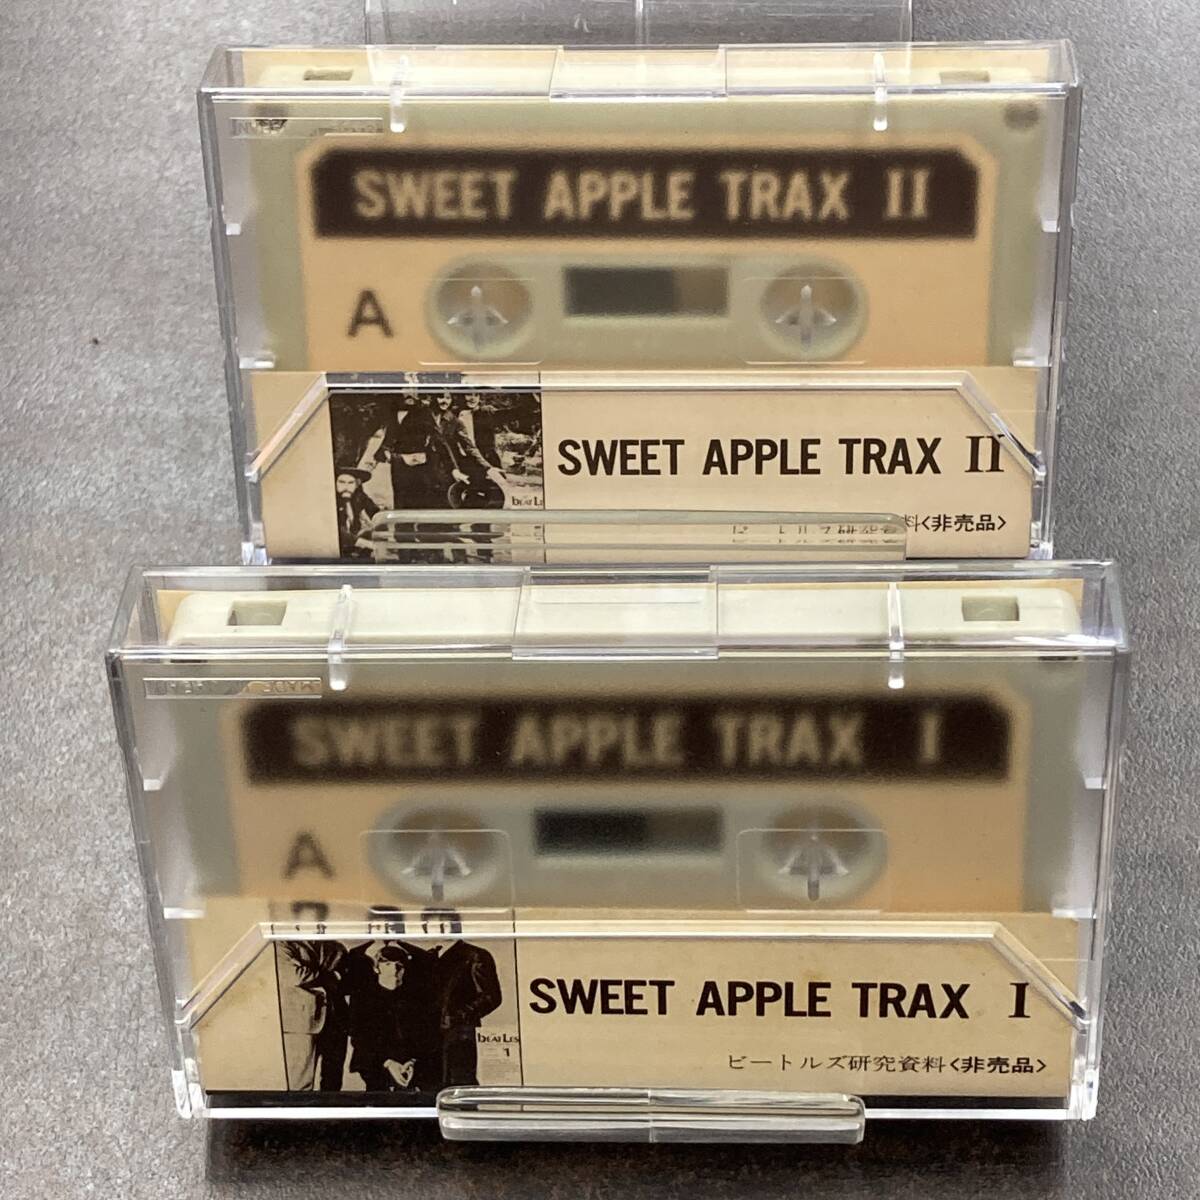 1223M ザ・ビートルズ 研究資料 SWEET APPLE TRAX 1-2 カセットテープ / THE BEATLES Research materials Cassette Tapeの画像5